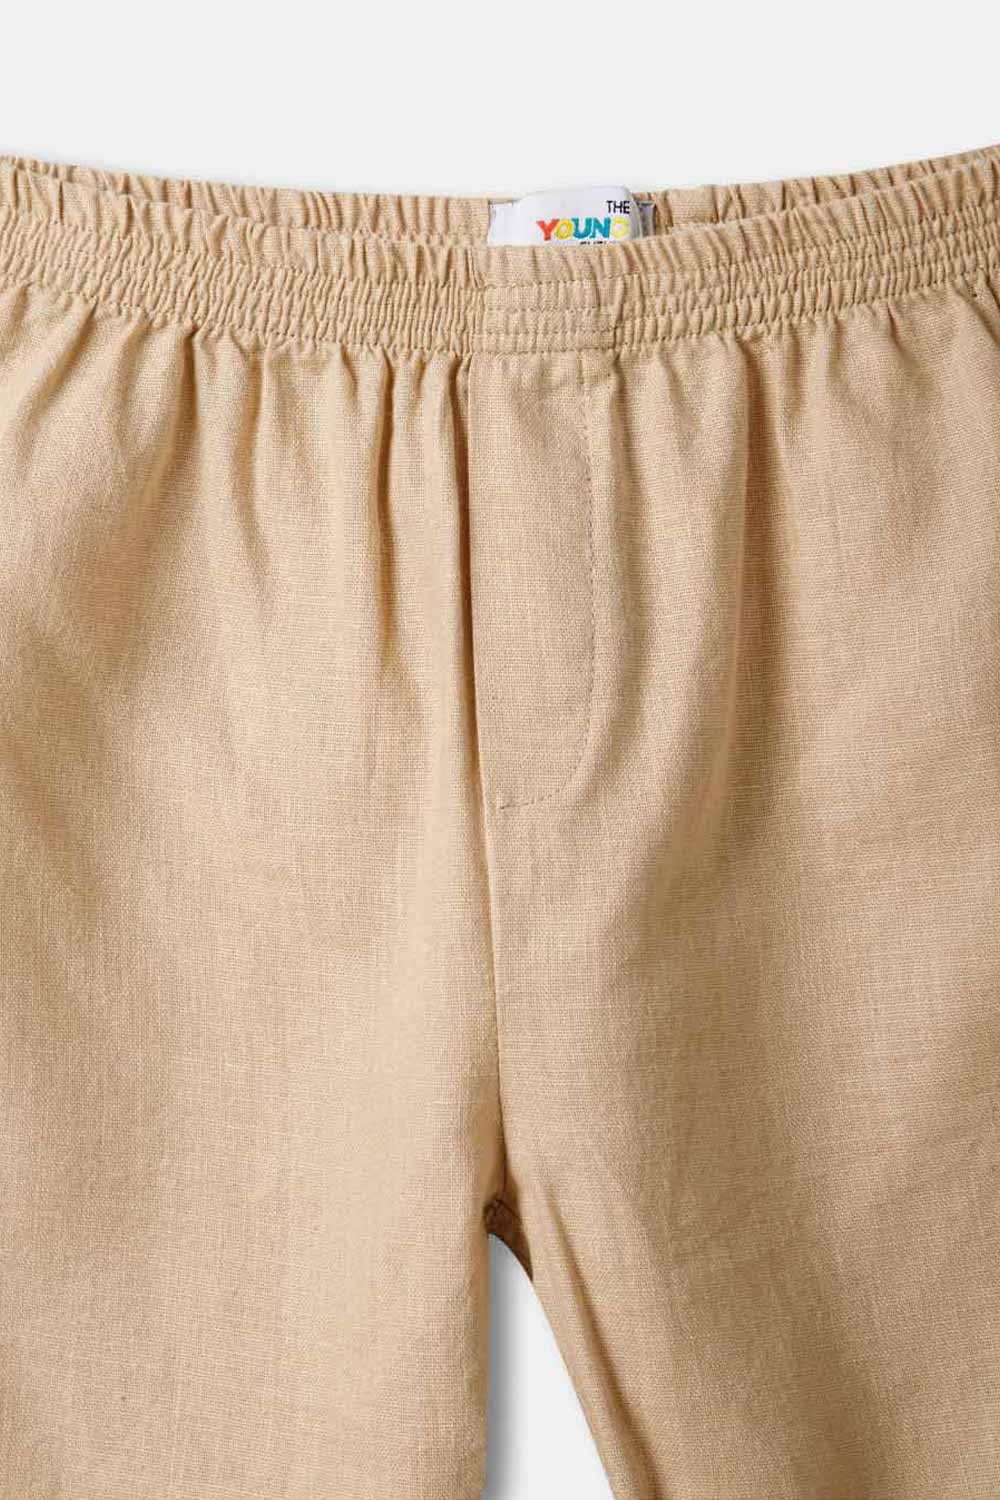 The Young Future  Shorts for Boys  - Beige  - BS03